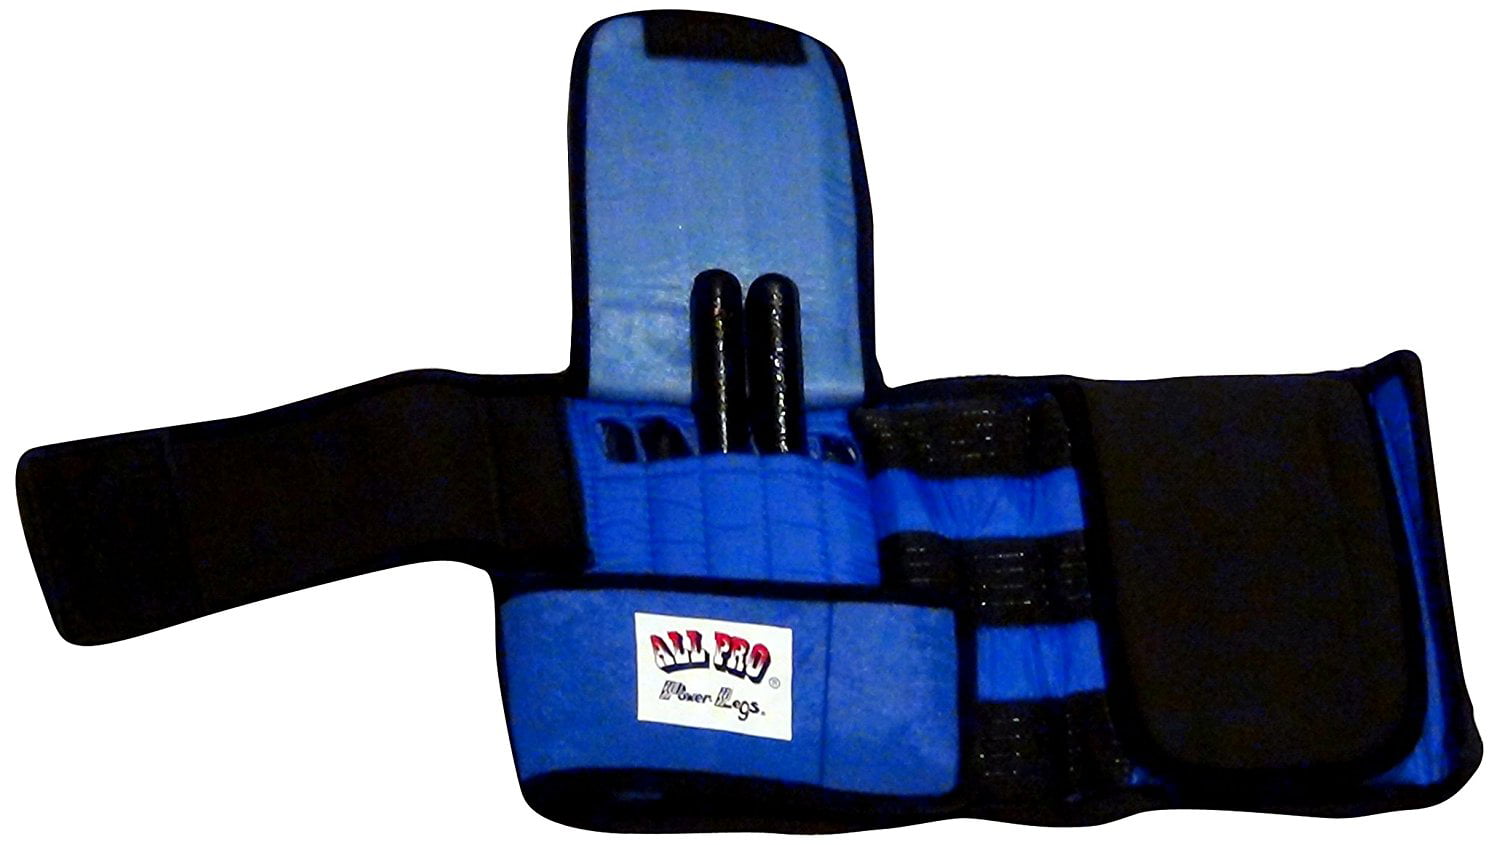 All Pro Adjustable Ankle Weights 10lb Pair 1/2lb to 5lbs per Weight Cushione for sale online